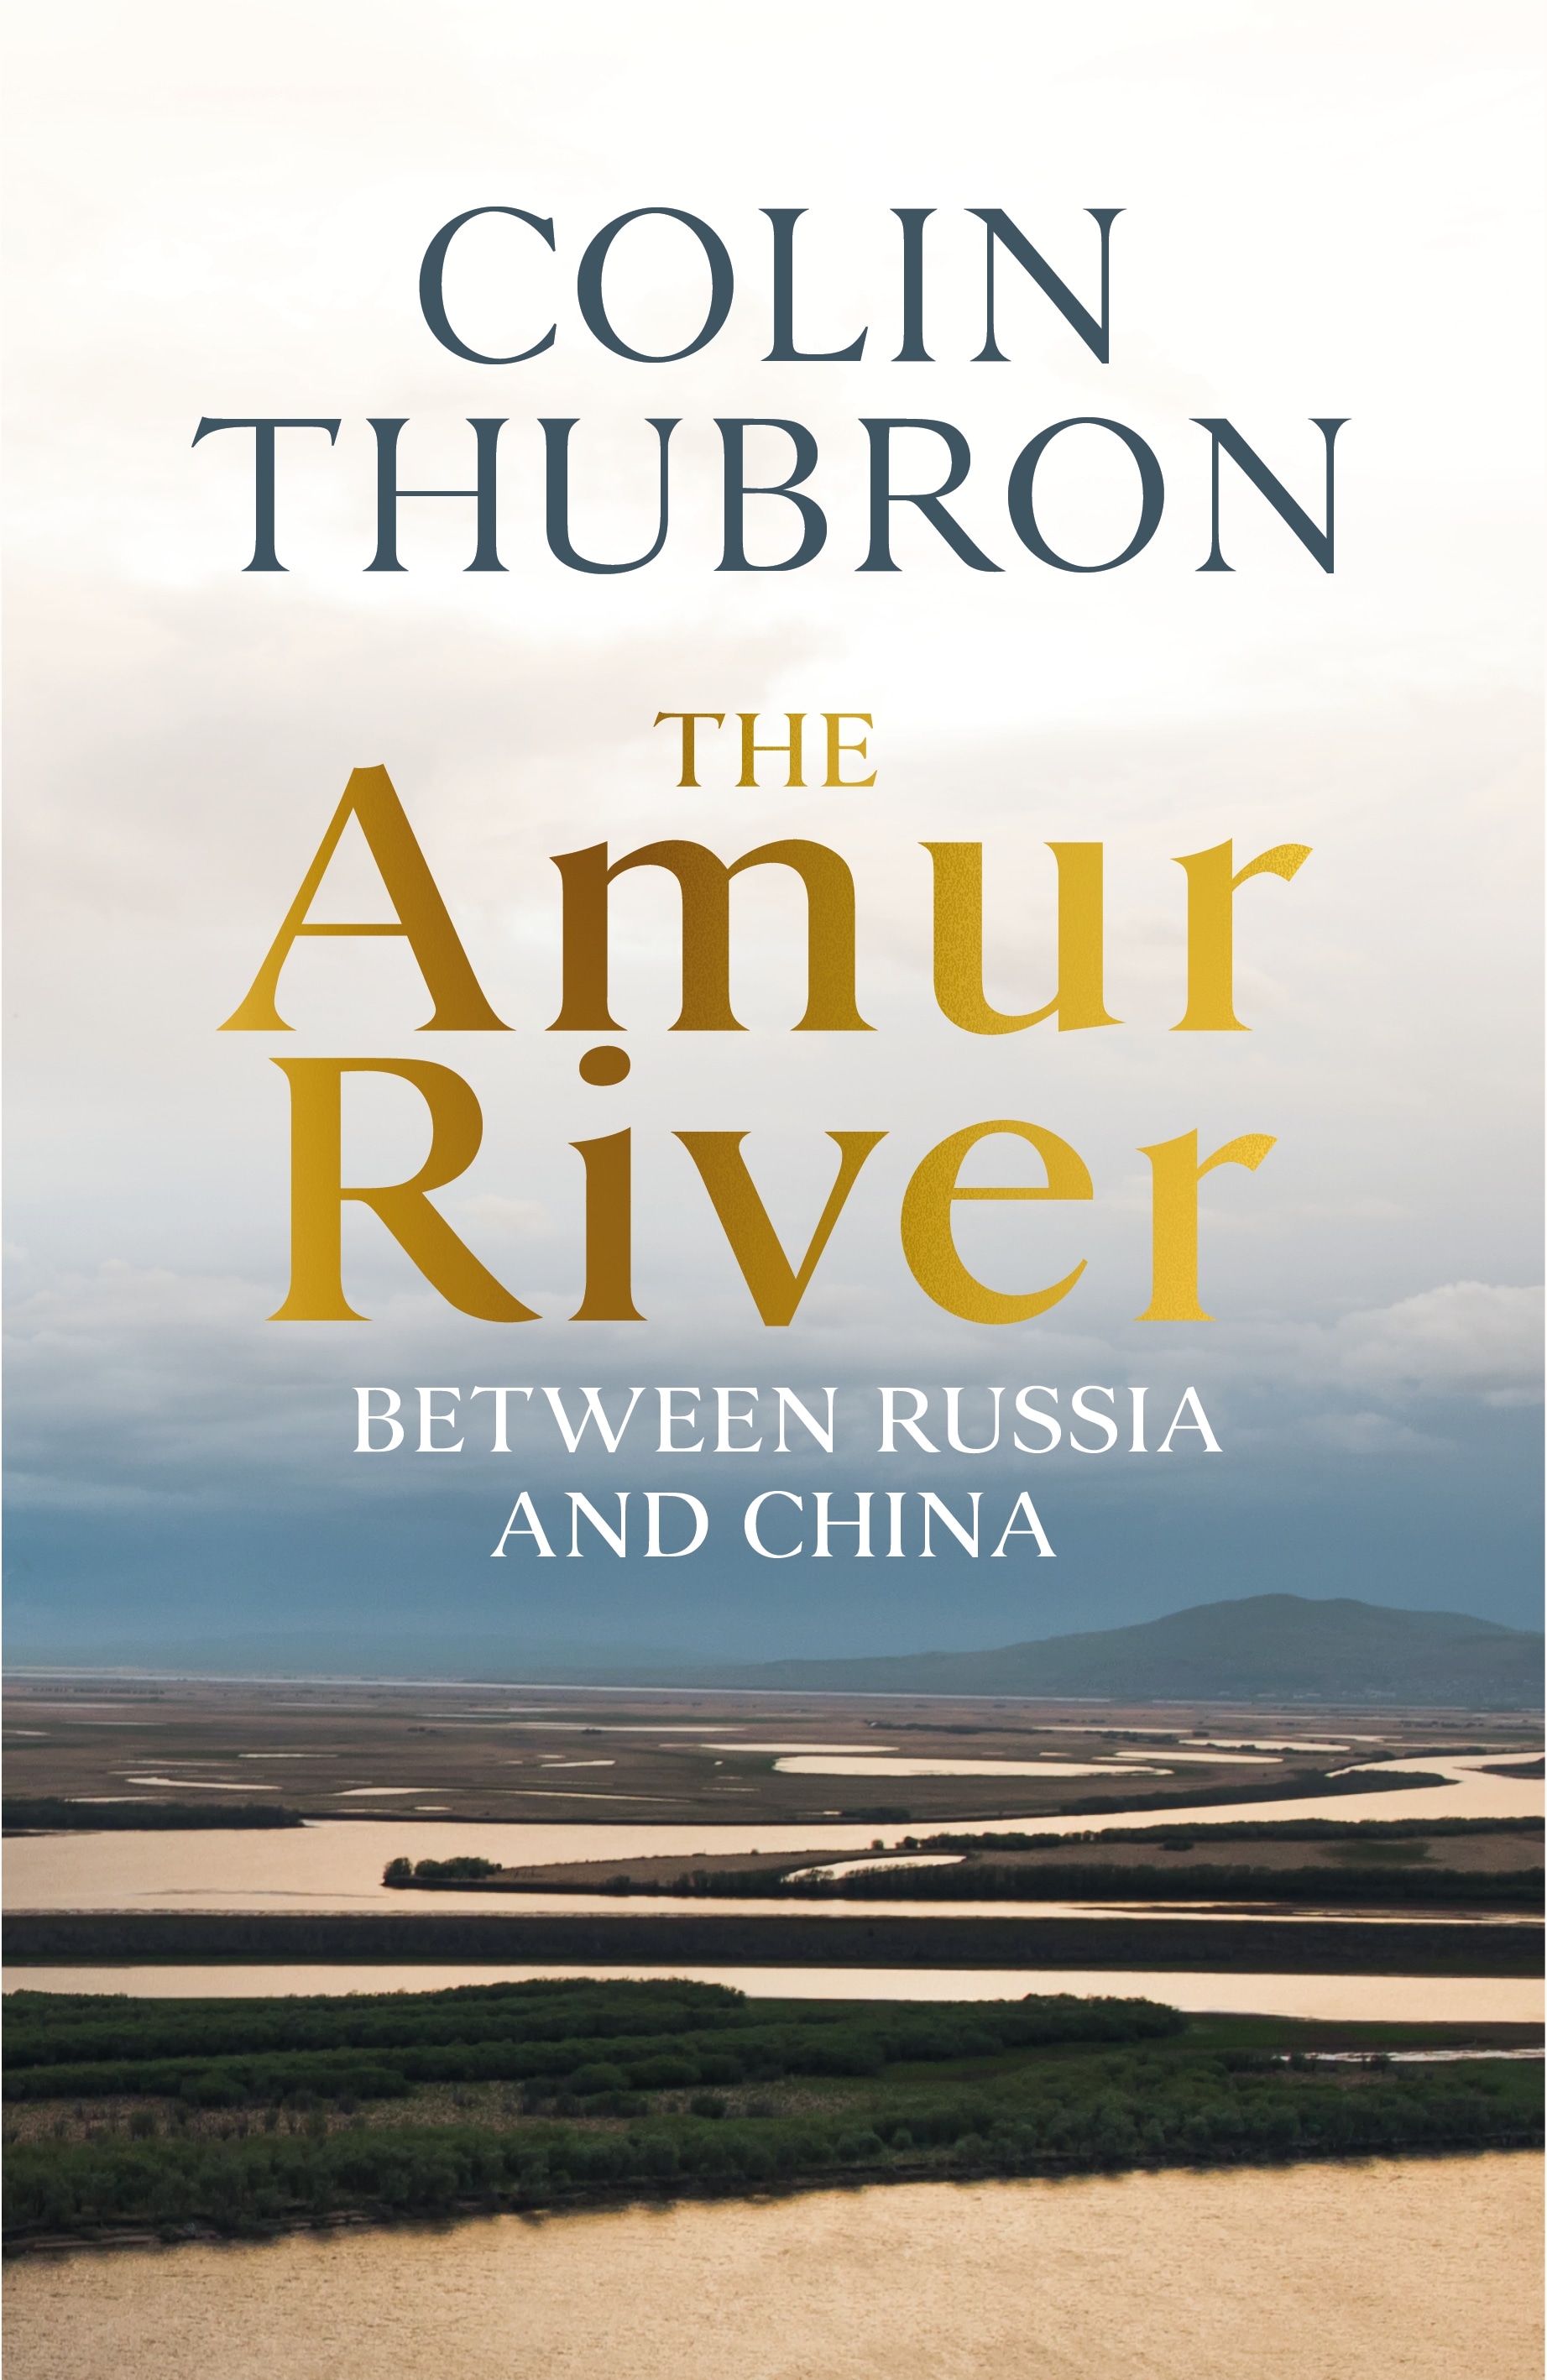 Book “The Amur River” by Colin Thubron — September 16, 2021